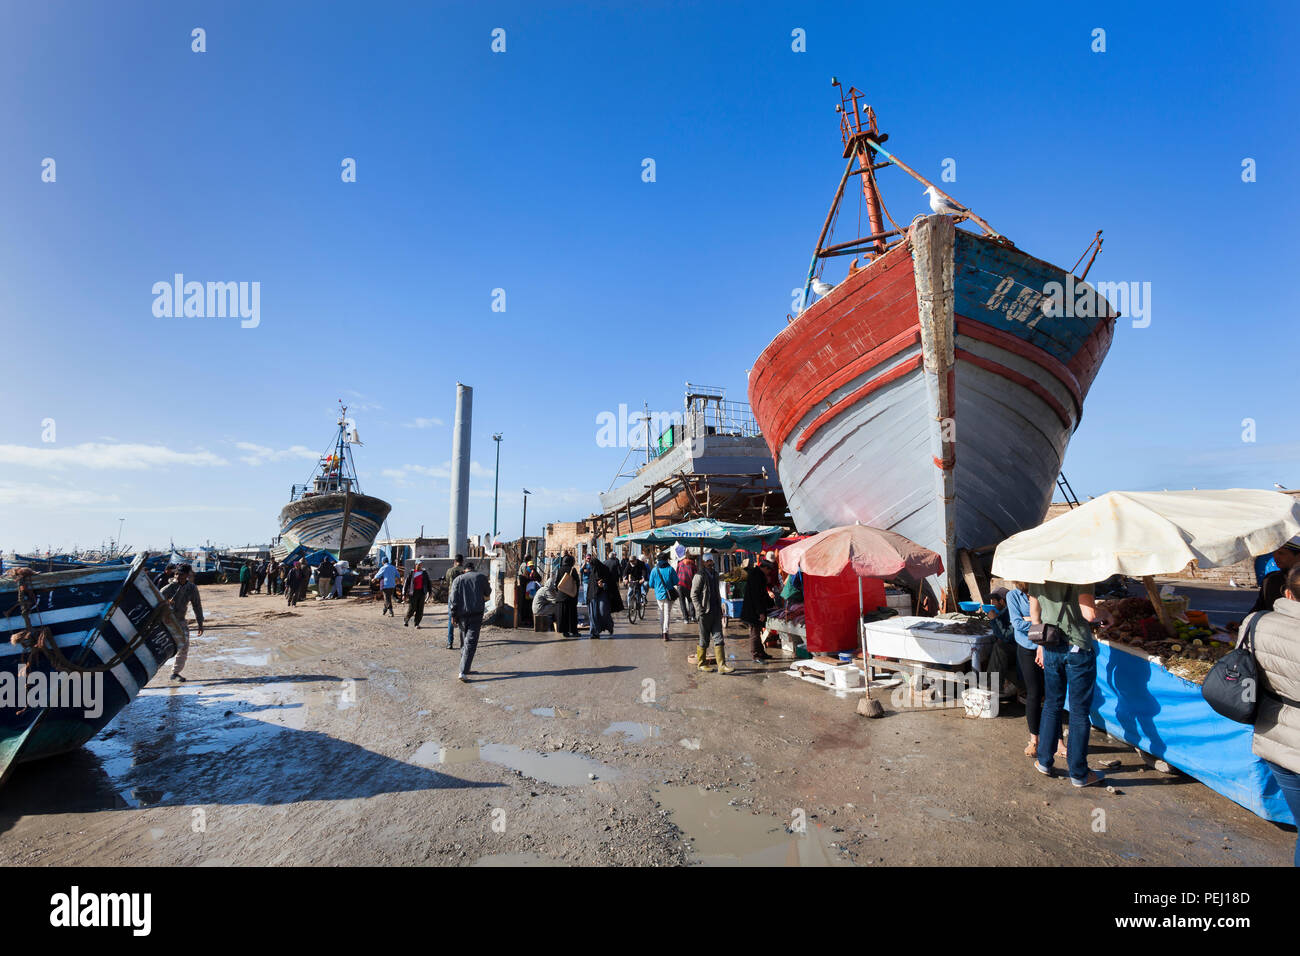 ESSAOUIRA, MOROCCO – JANUARY 8, 2018: Tourists and local people visiting the traditional the fish market at the harbor of Essaouira Stock Photo